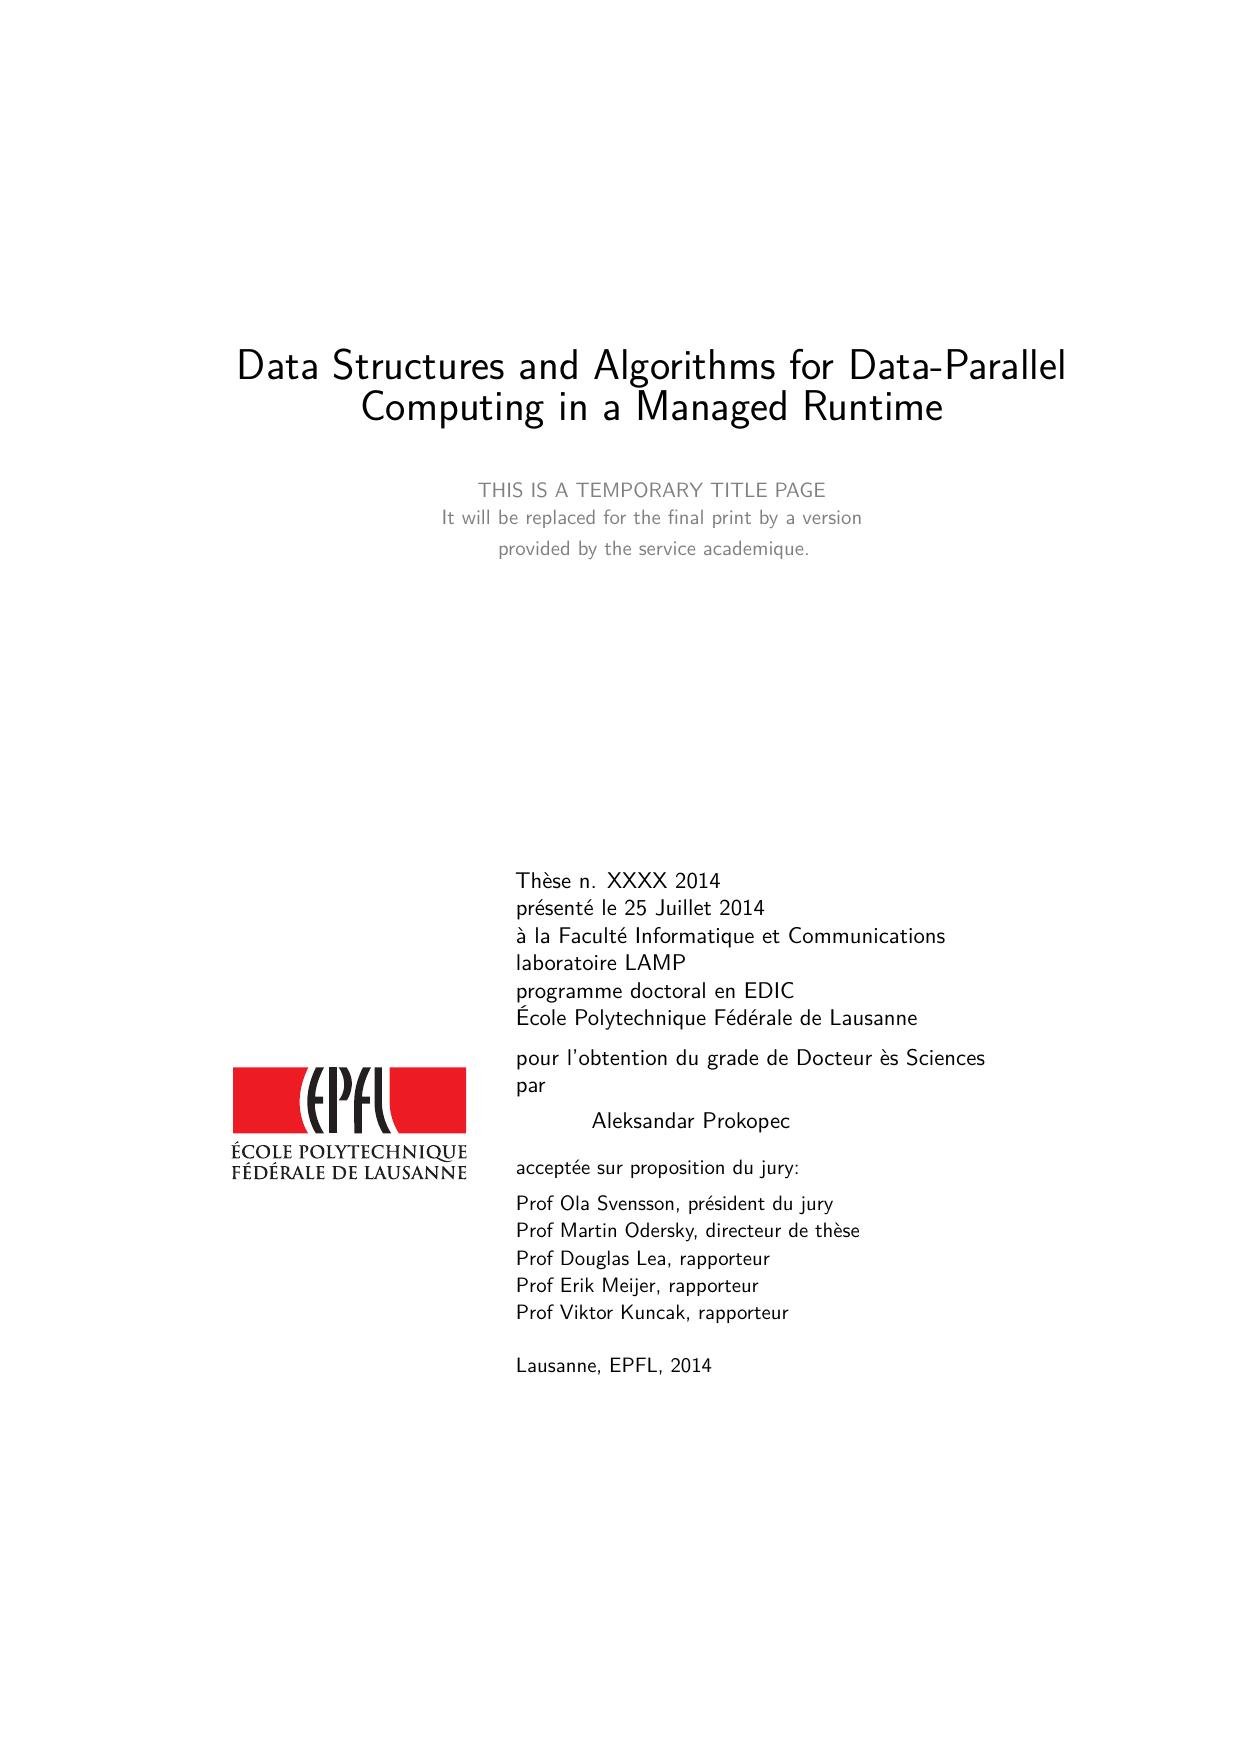 Data Structures and Algorithms for Data-Parallel Computing in a Managed Runtime  2014